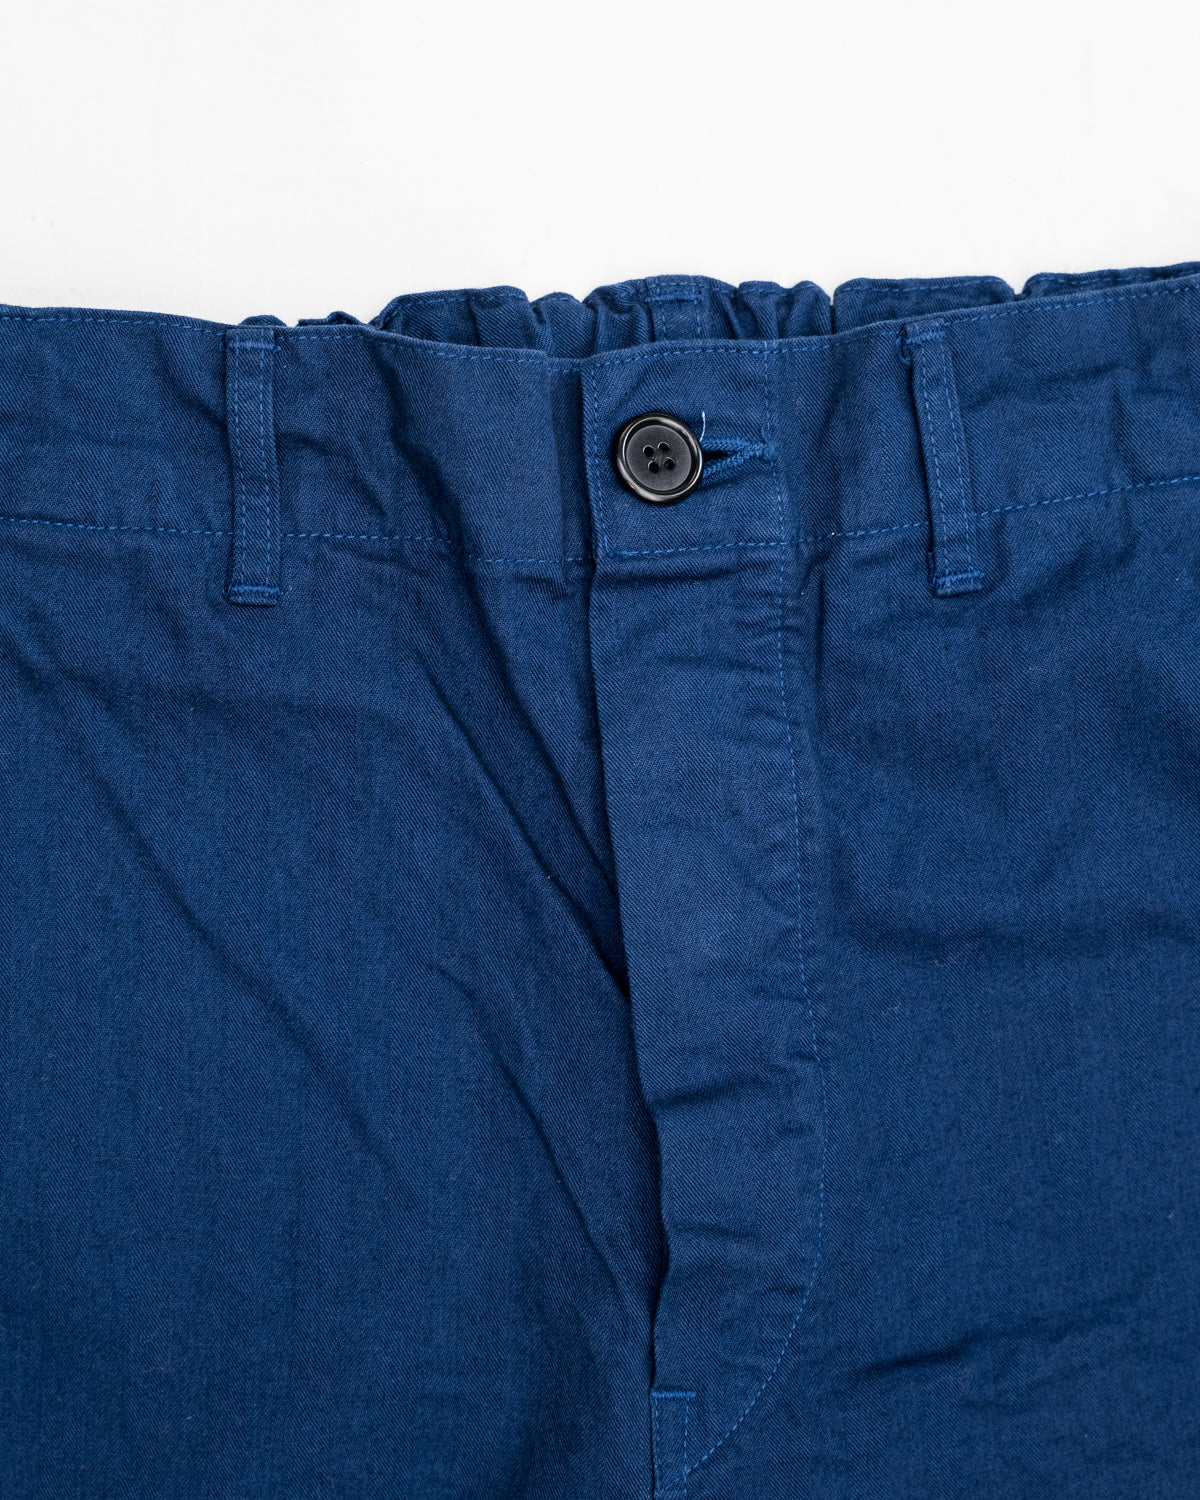 03-5000-03 - French Work Pant - French Blue